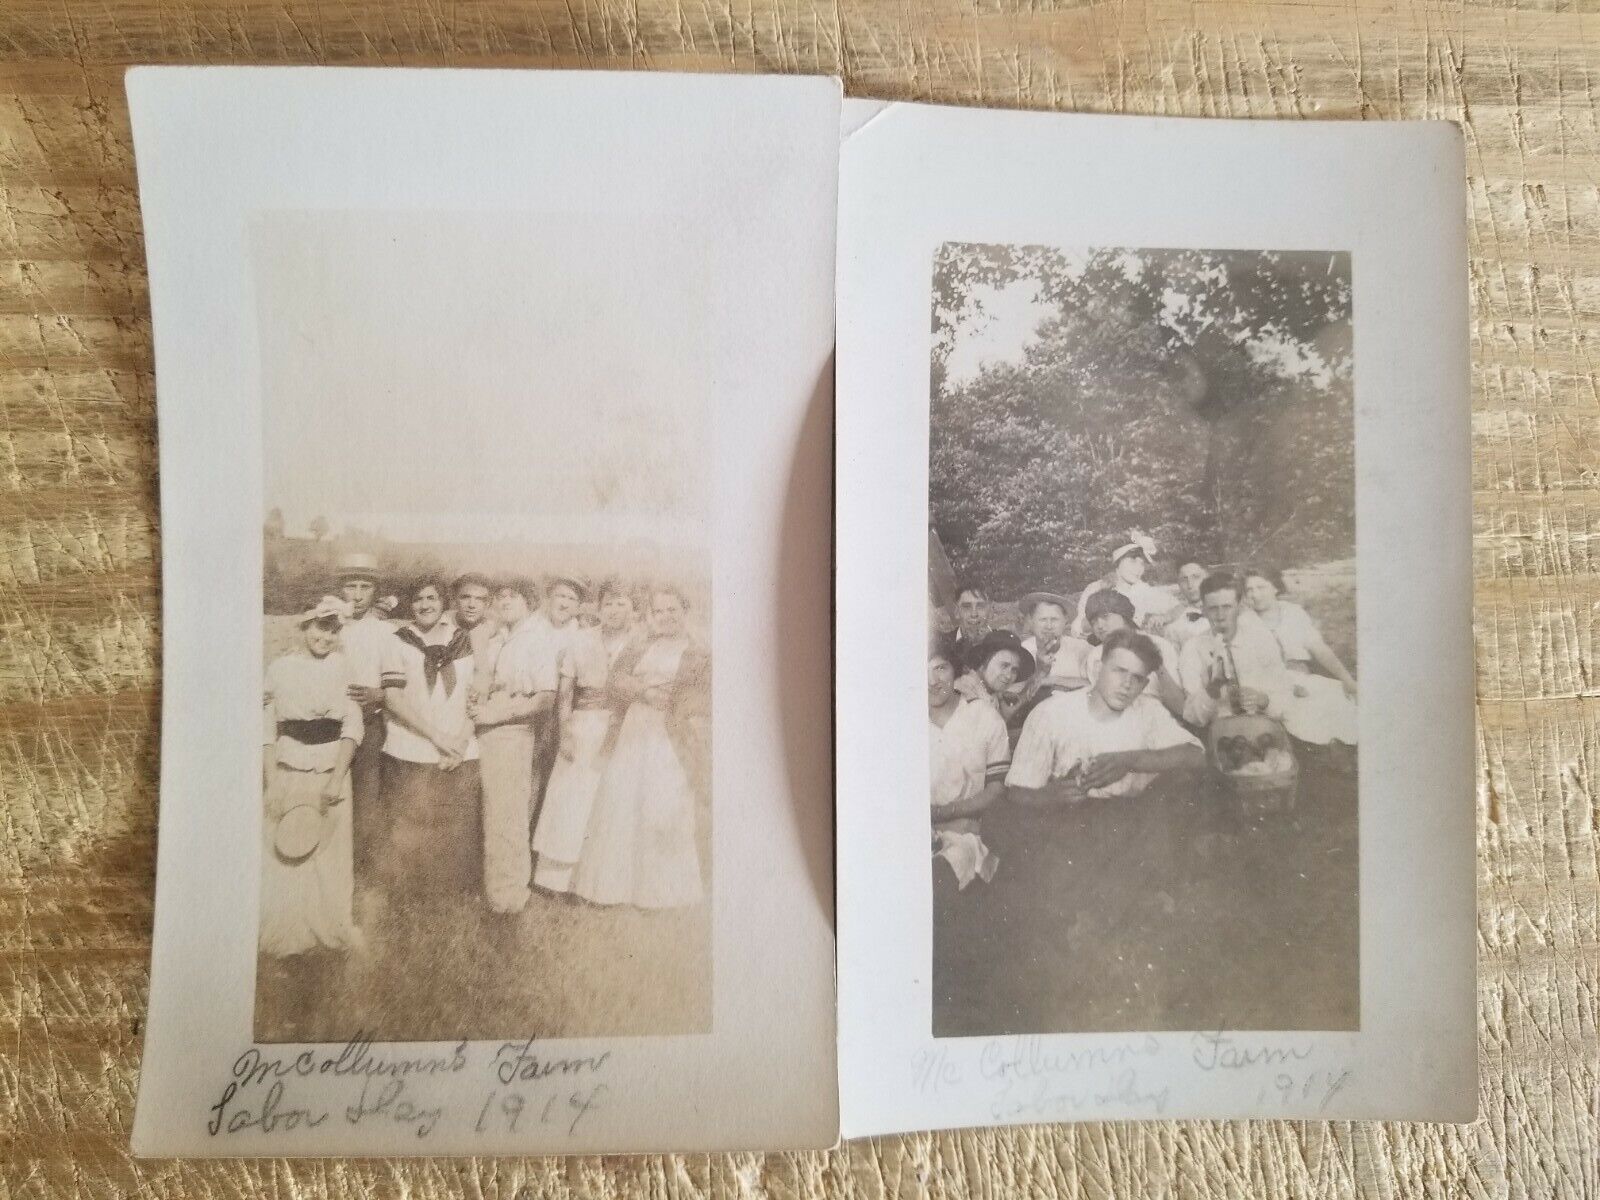 MCOLLUMMS FARM,LABOR DAY 1914.TWO REAL PHOTO POSTCARDS.*P7